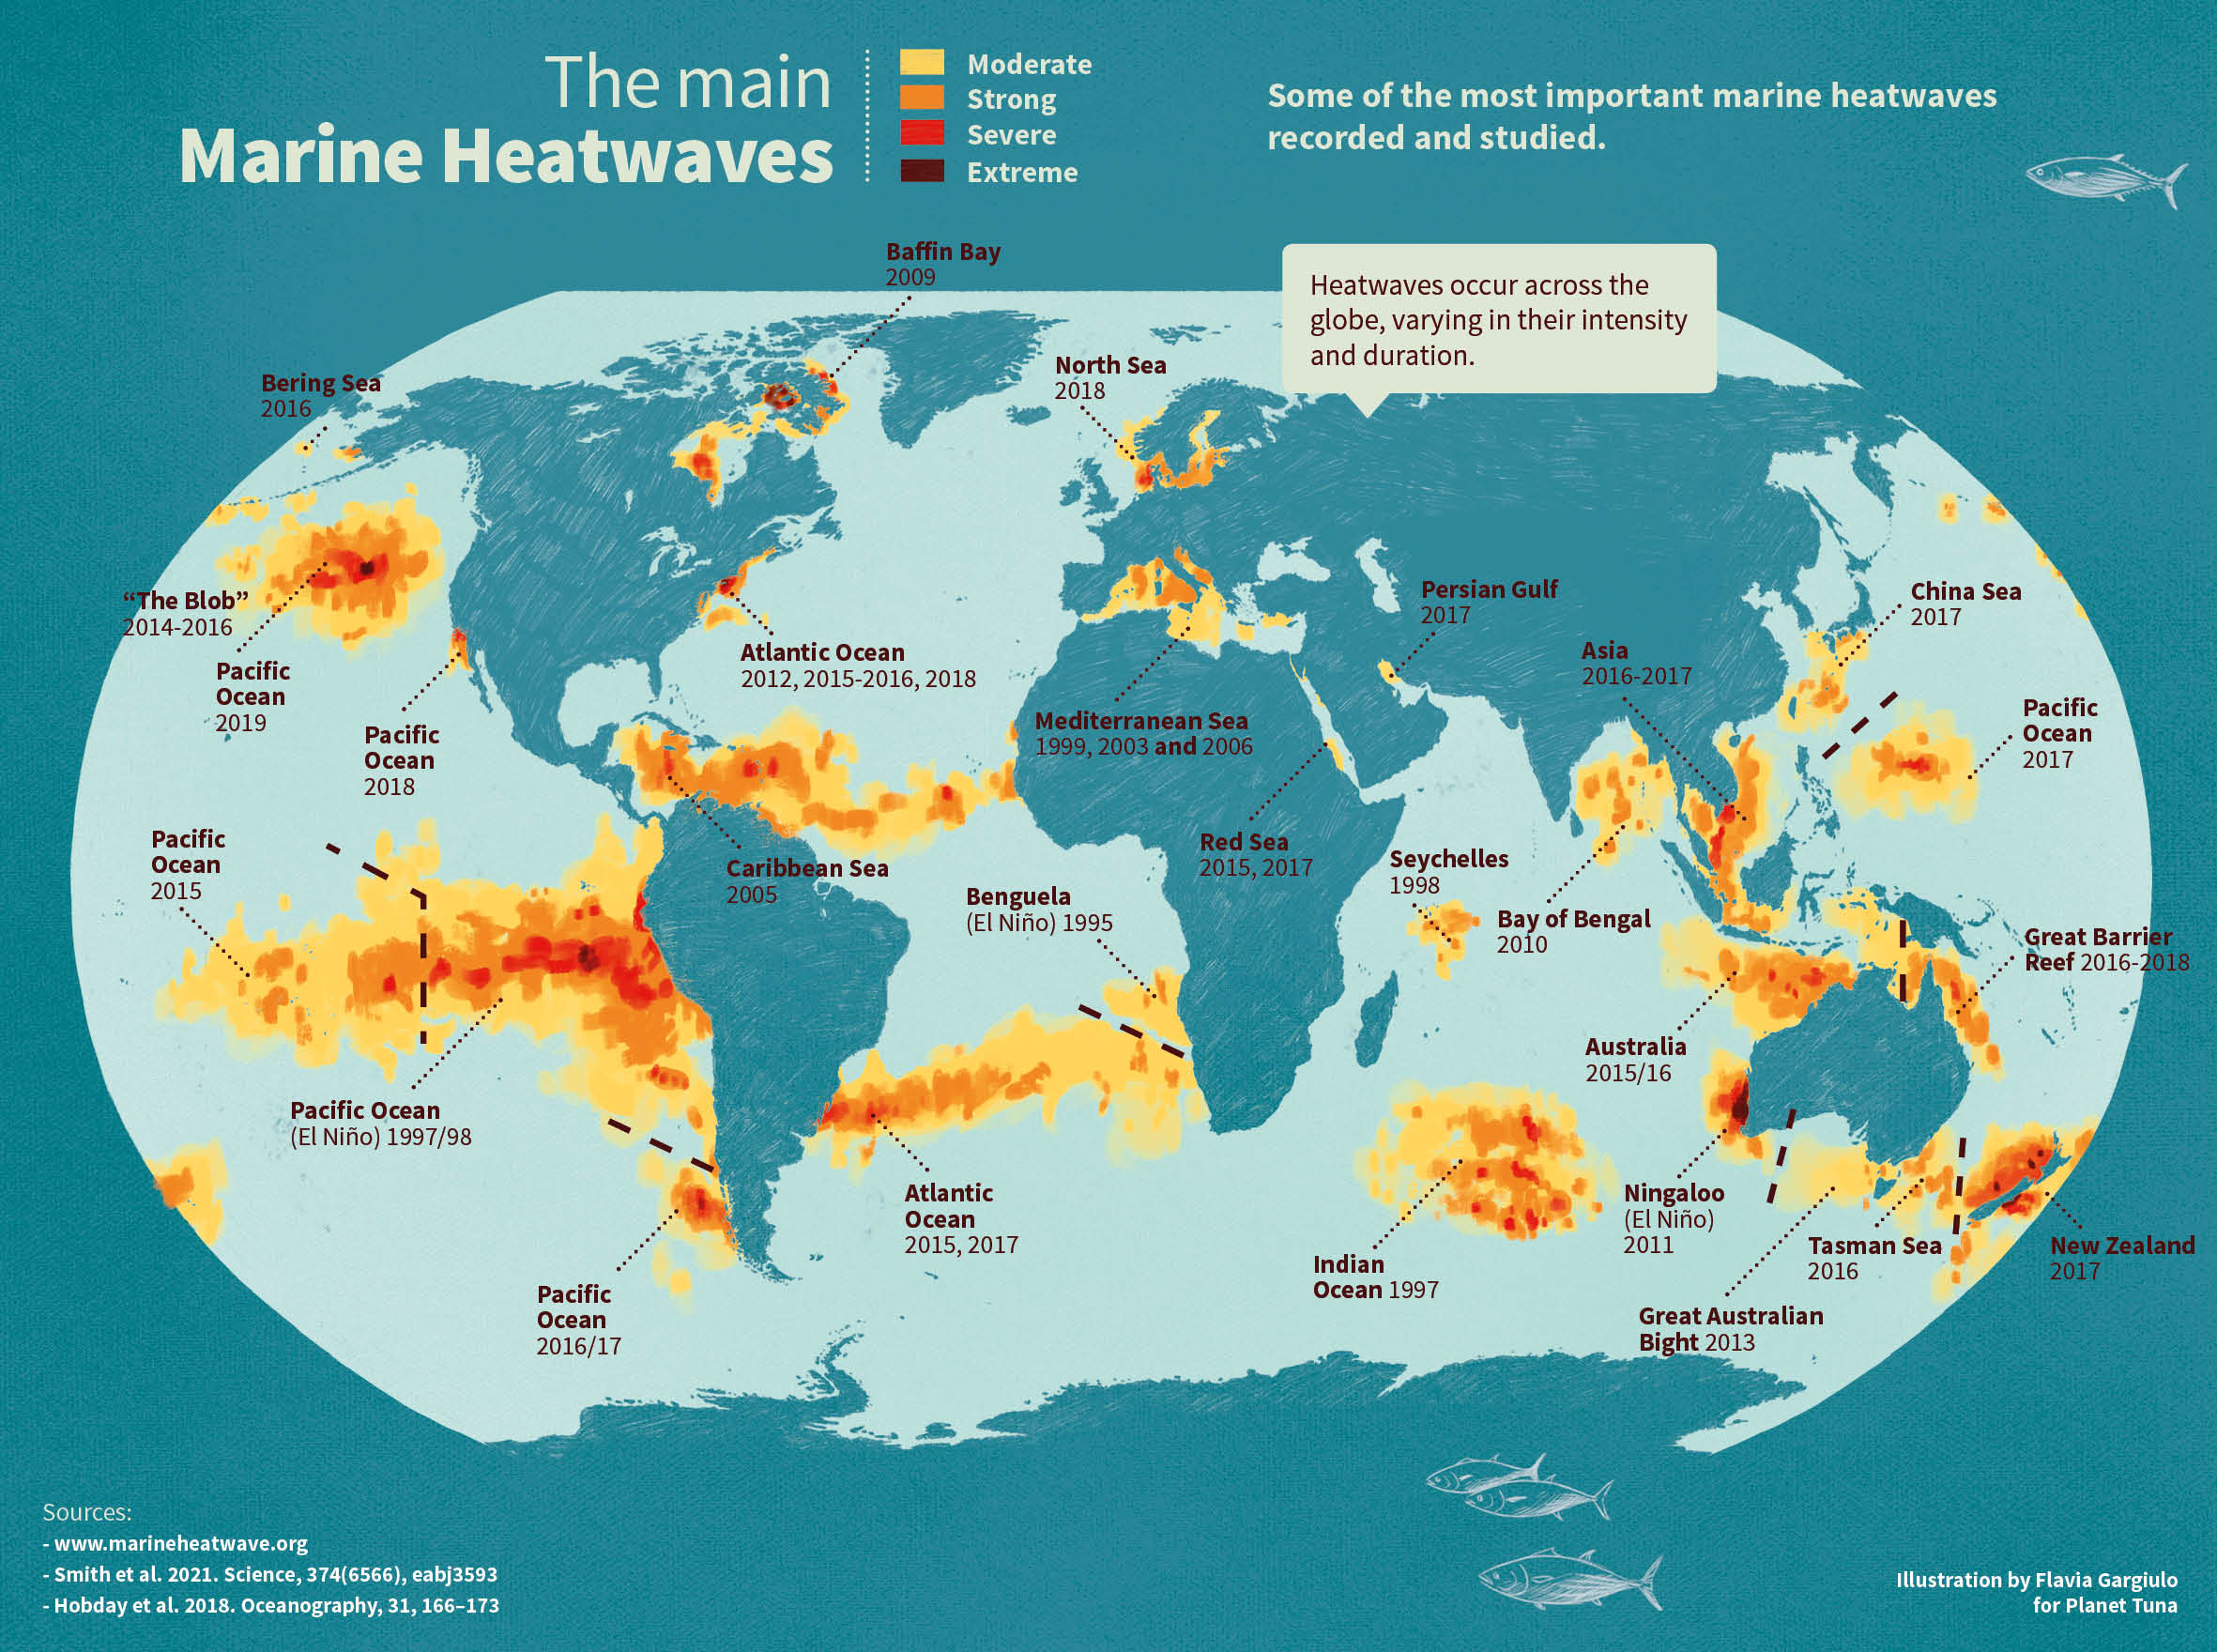 The illustration shows the world’s most significant marine heatwaves. It includes a bar chart highlighting the development of the intensity and frequency of marine heatwaves over time. The map shows the most significant heatwaves around the globe and the date on which they occurred.